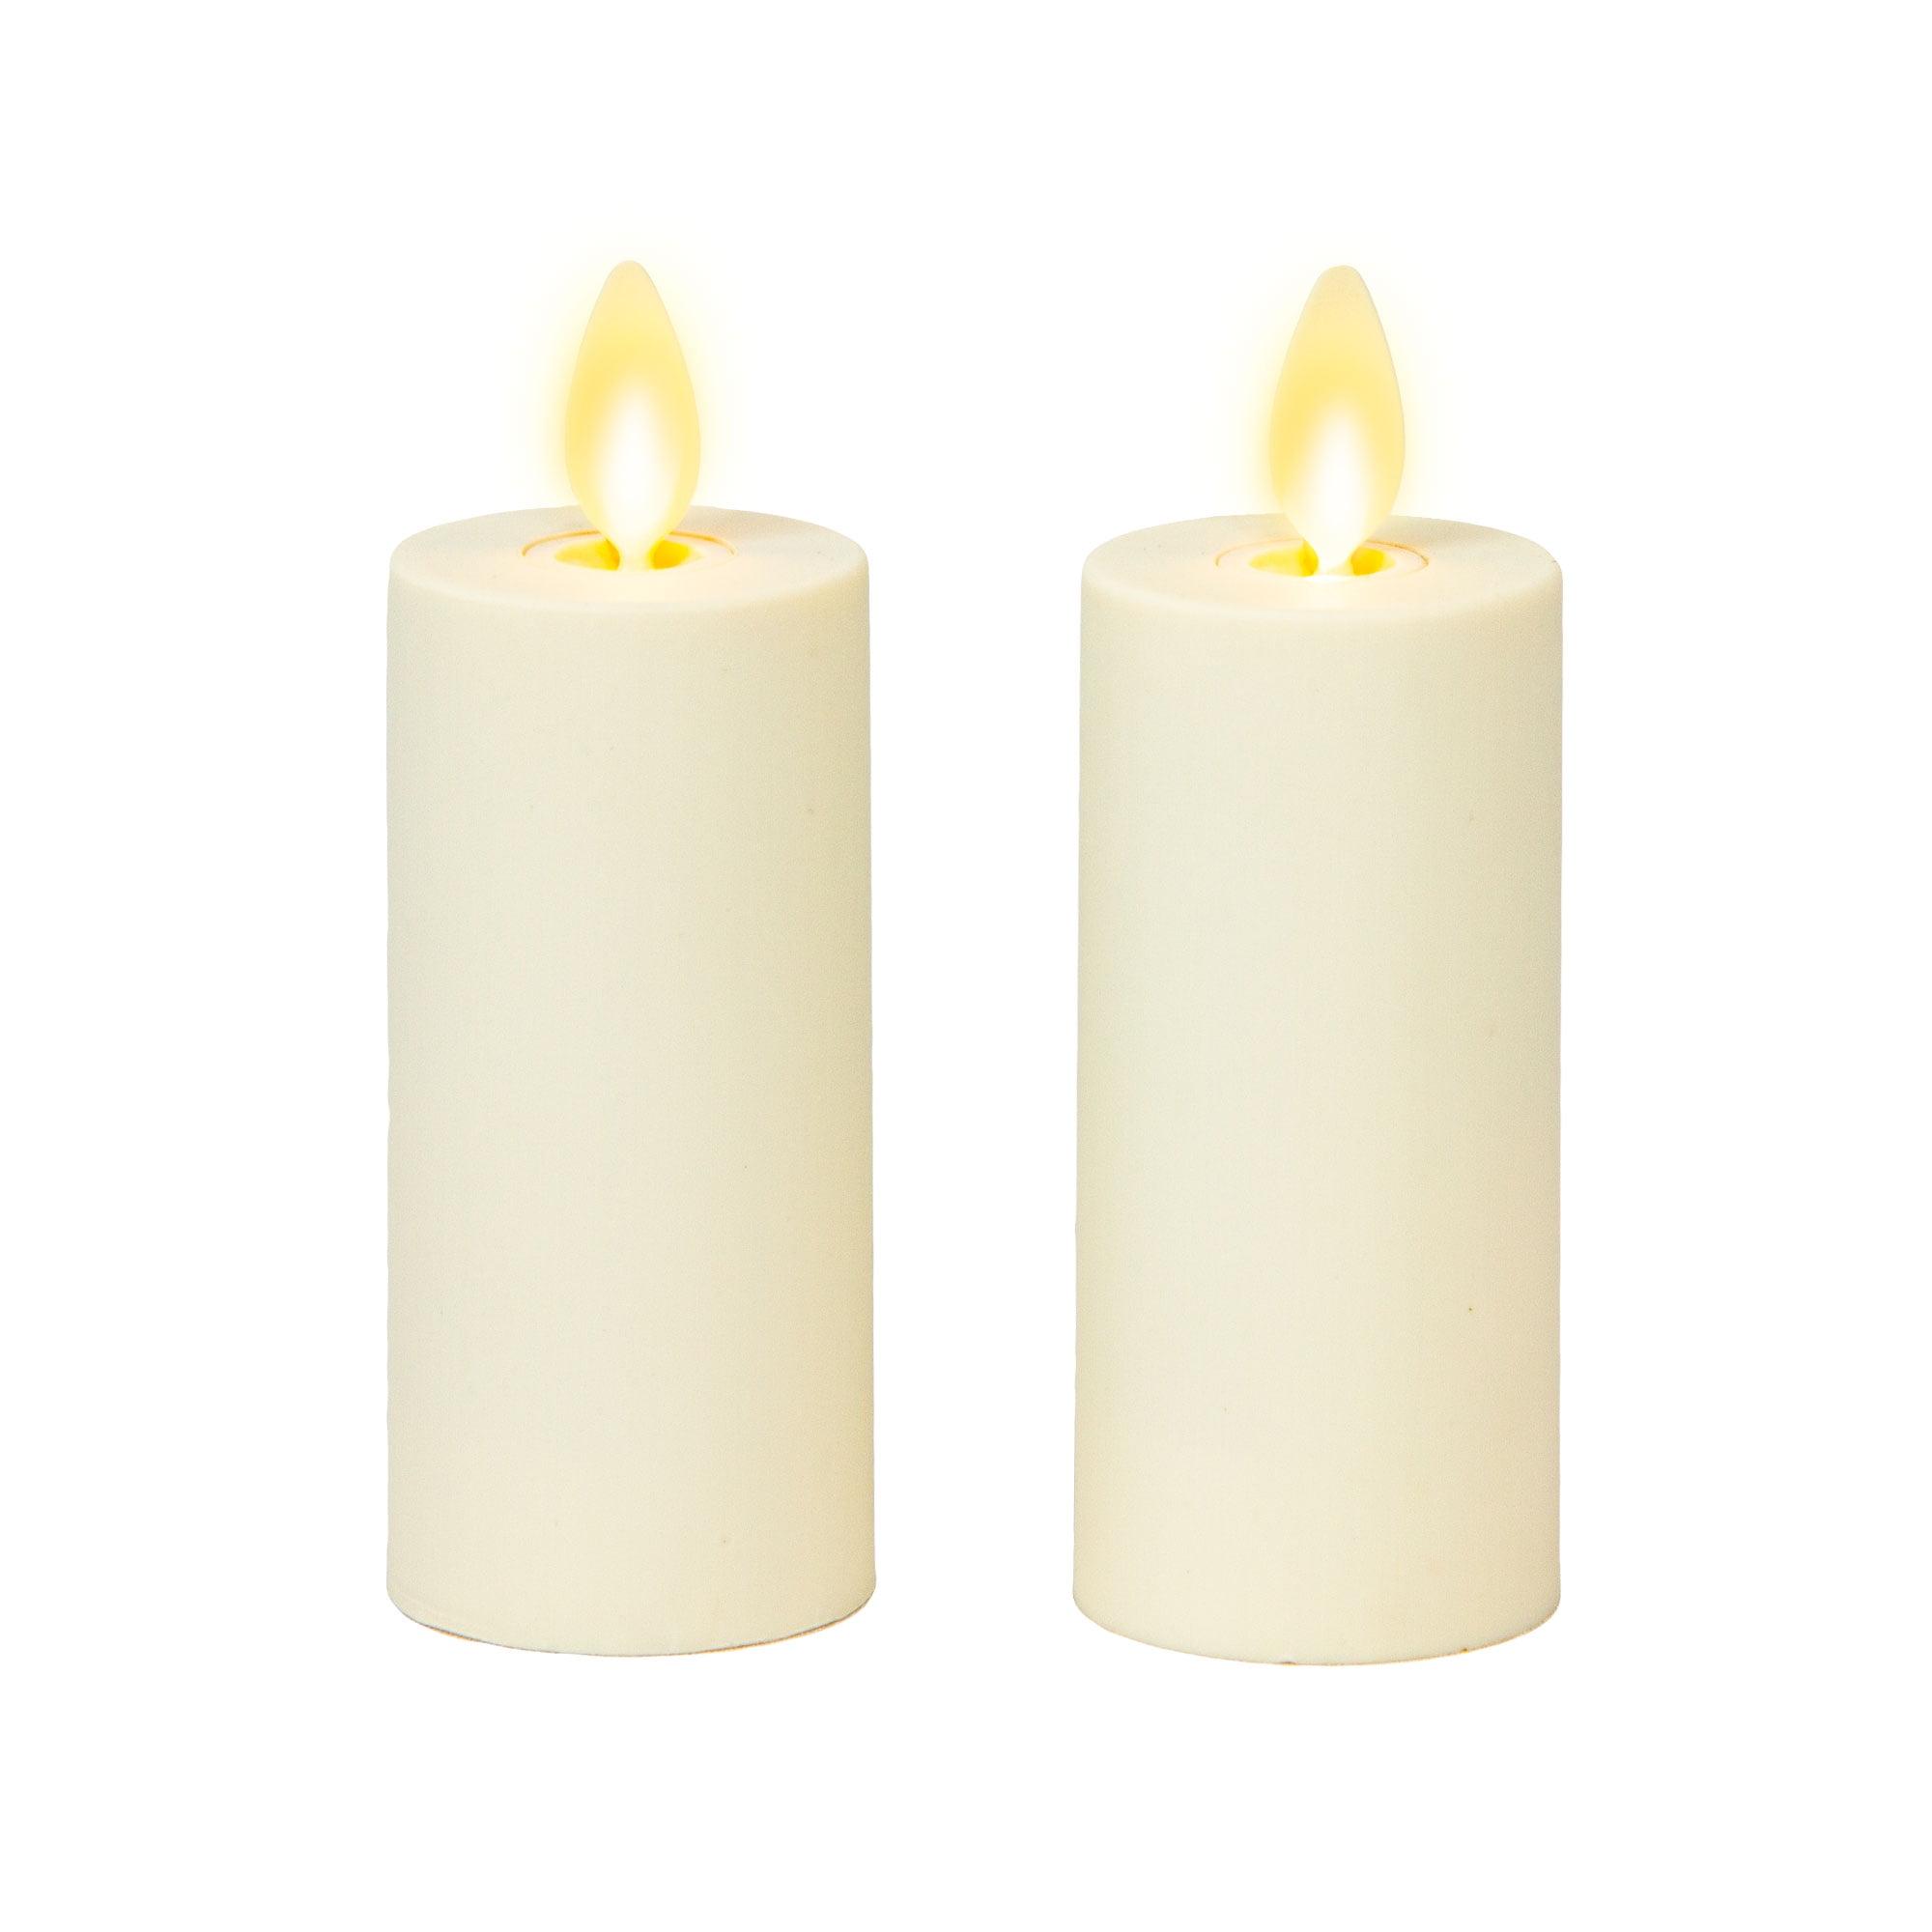 Classic White Flameless LED Votive Candles with Remote Control - Set of 2